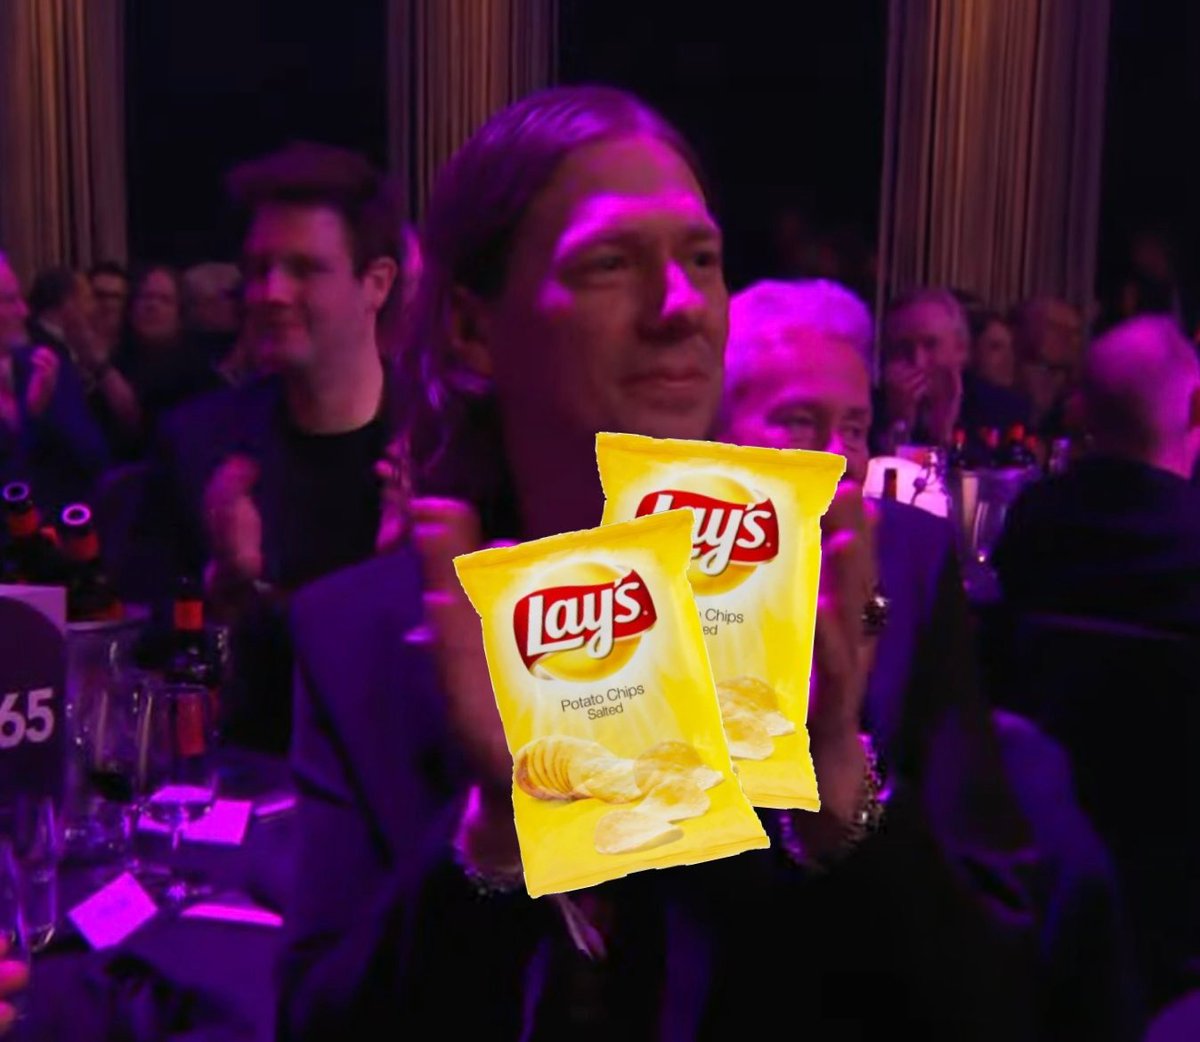 tobias and his two chip bags for making phantomine ❤️